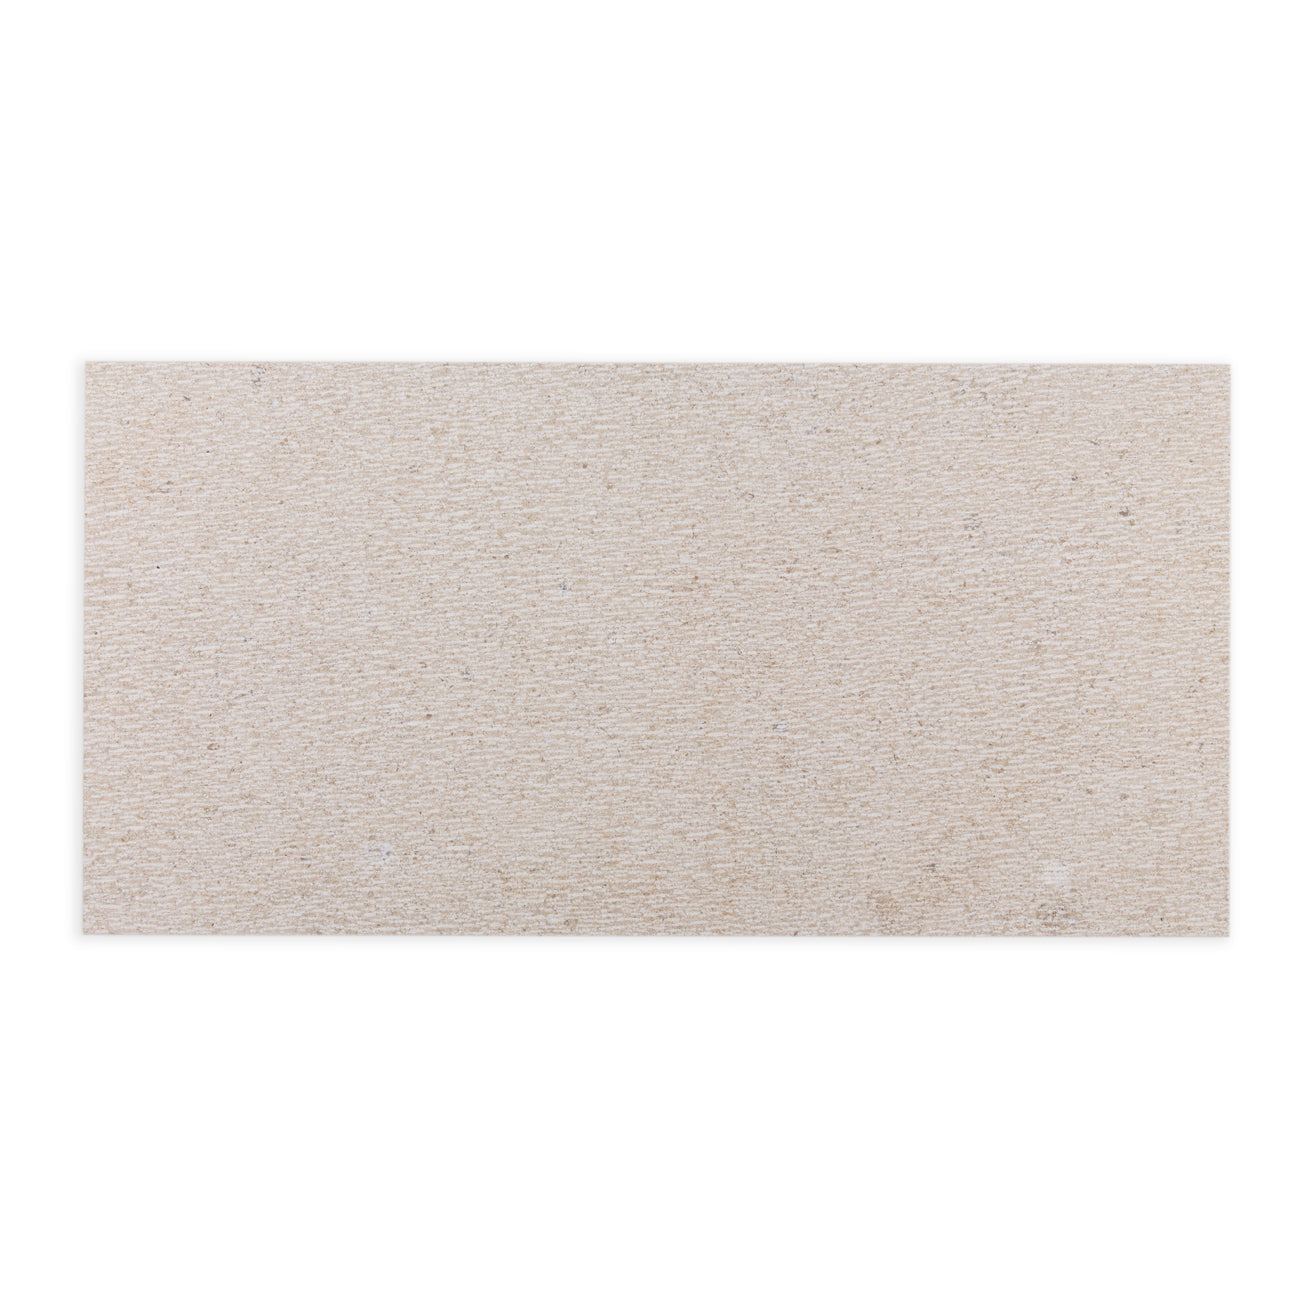 Fonjone Gascogne Beige Limestone Field Tile by Haussmann - 12"x24"x3/8" rectangle tile with linen finish and straight edge